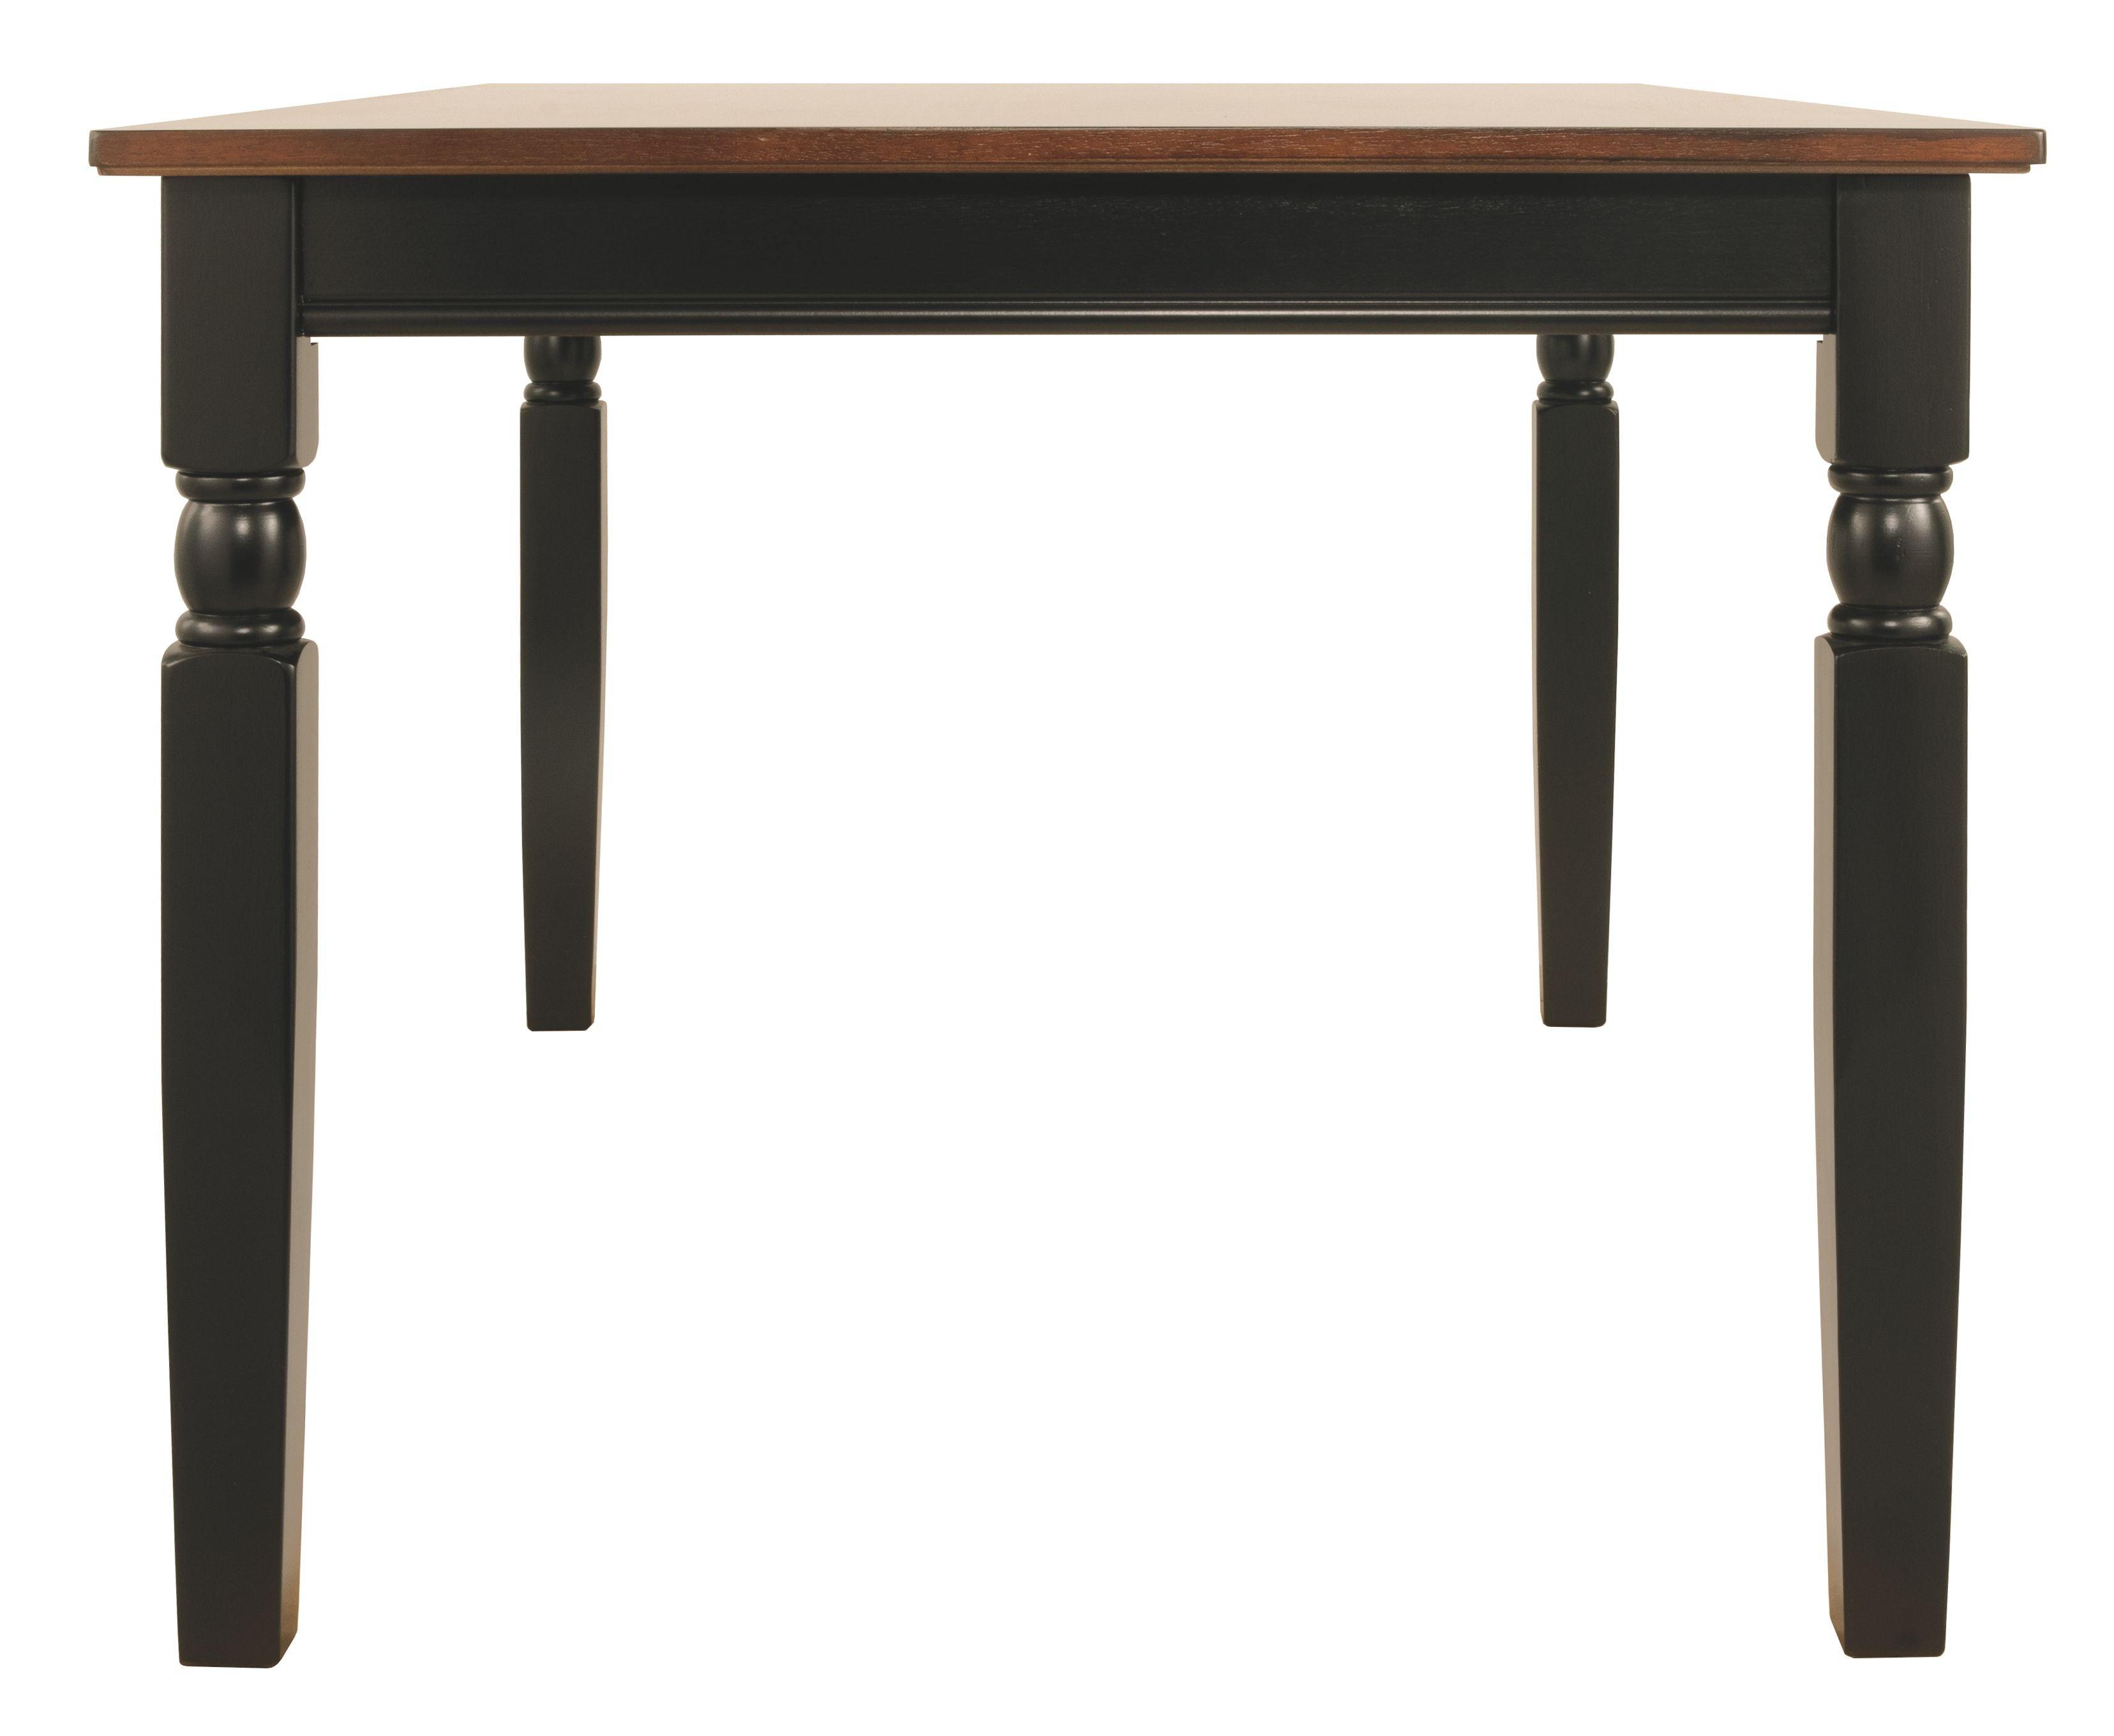 Signature Design by Ashley® - Owingsville - Black / Brown - Rectangular Dining Room Table - 5th Avenue Furniture